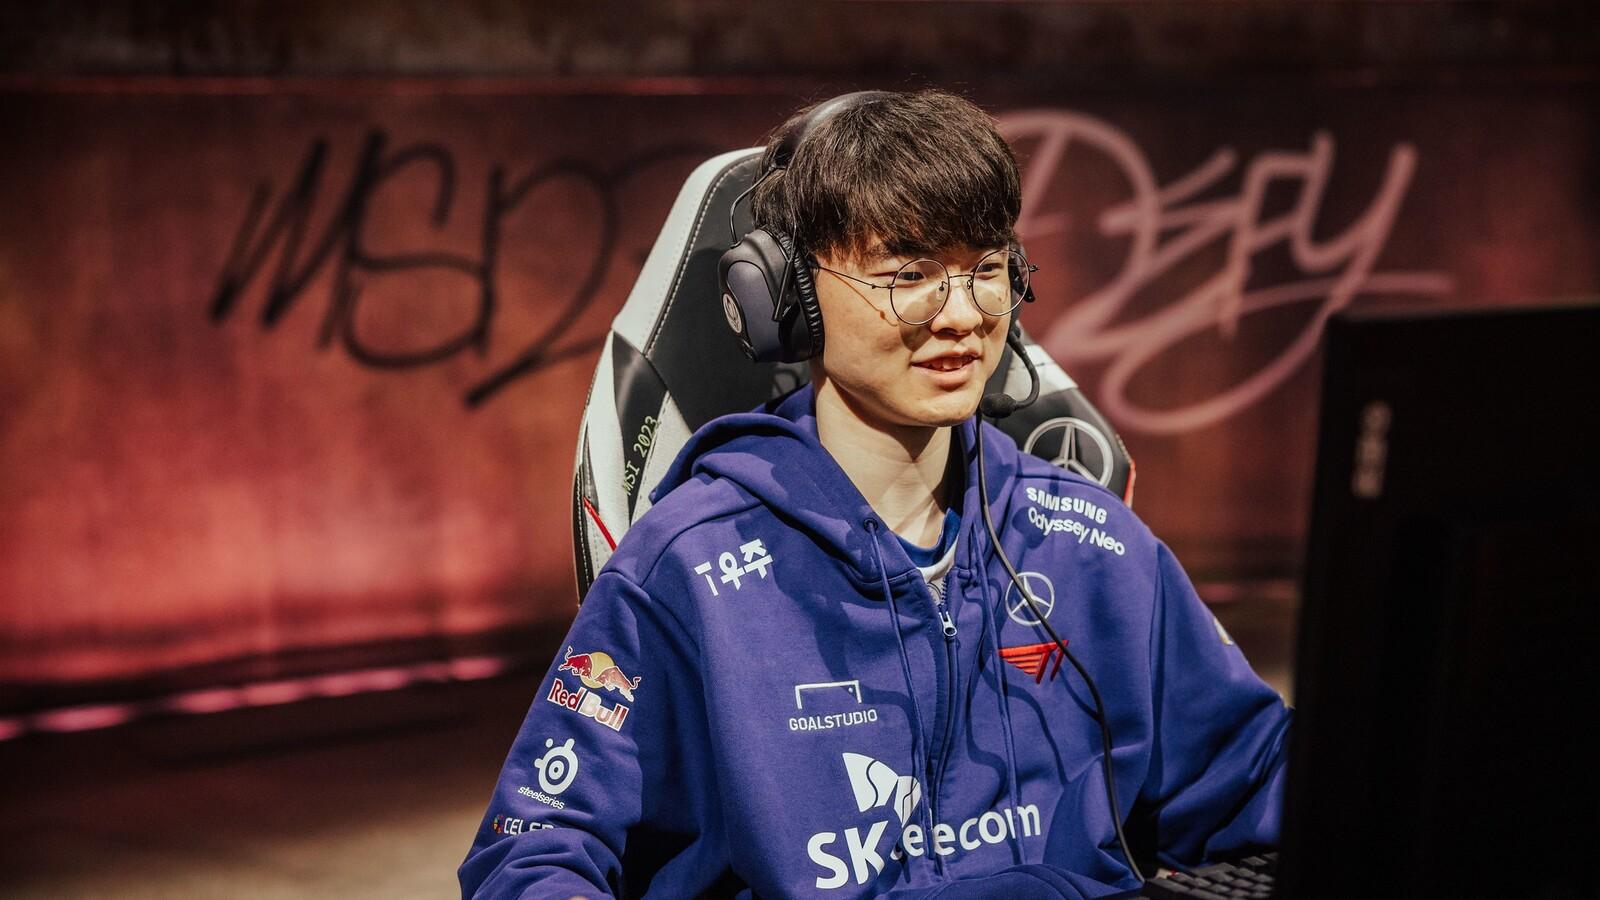 Faker to T1 teammates: You guys did a great job. From the bottom